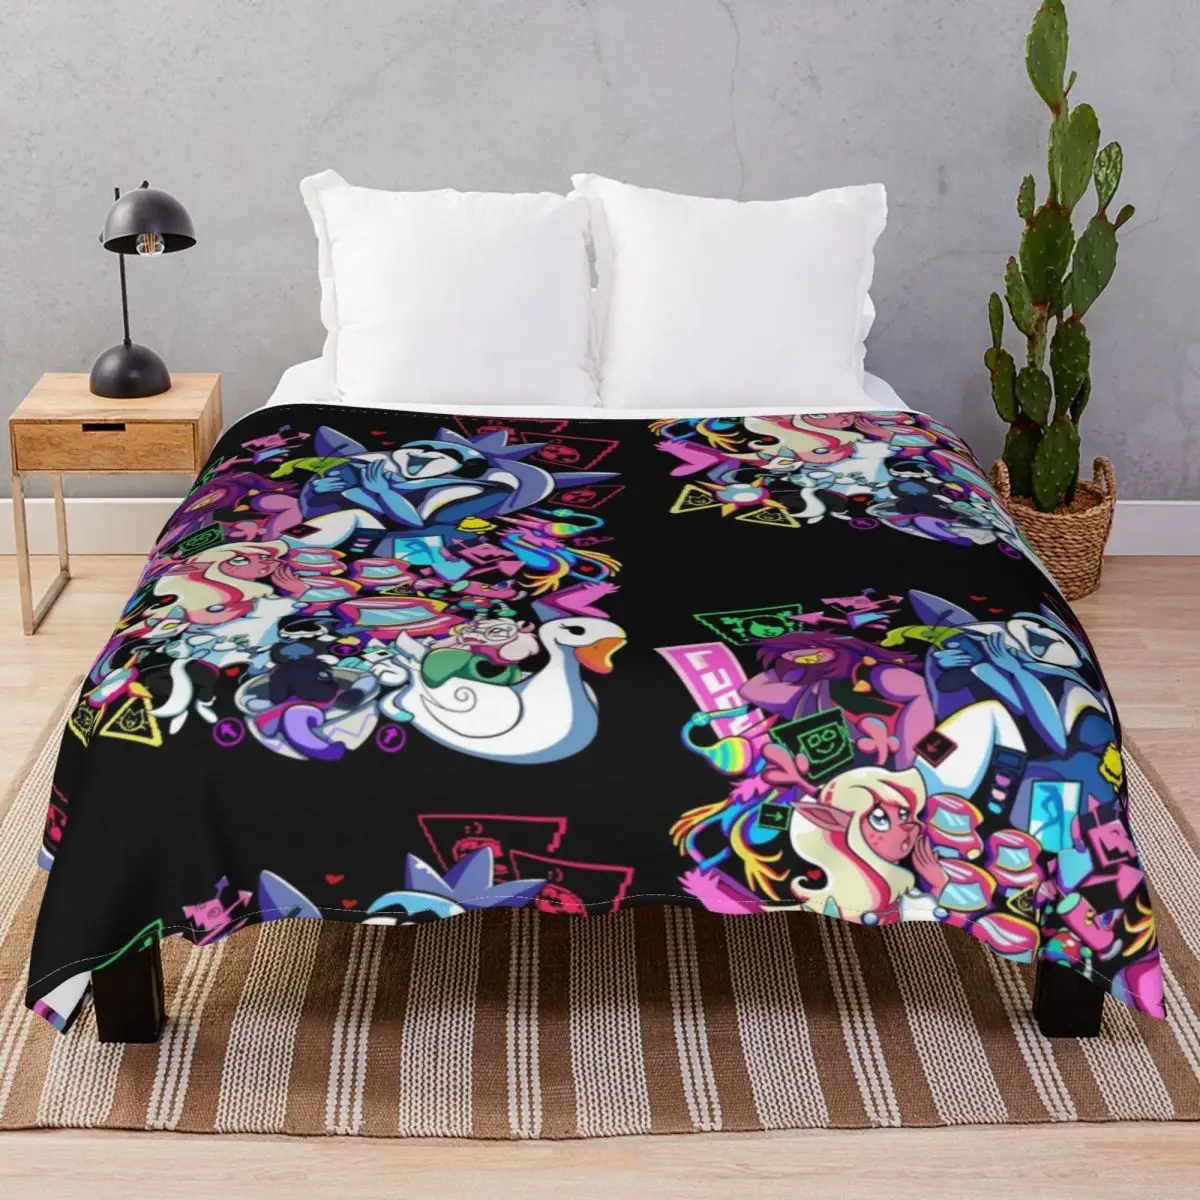 DELTARUNE Chapter Blanket Coral Fleece Summer Multi-function Throw Blankets for Bed Home Couch Travel Office